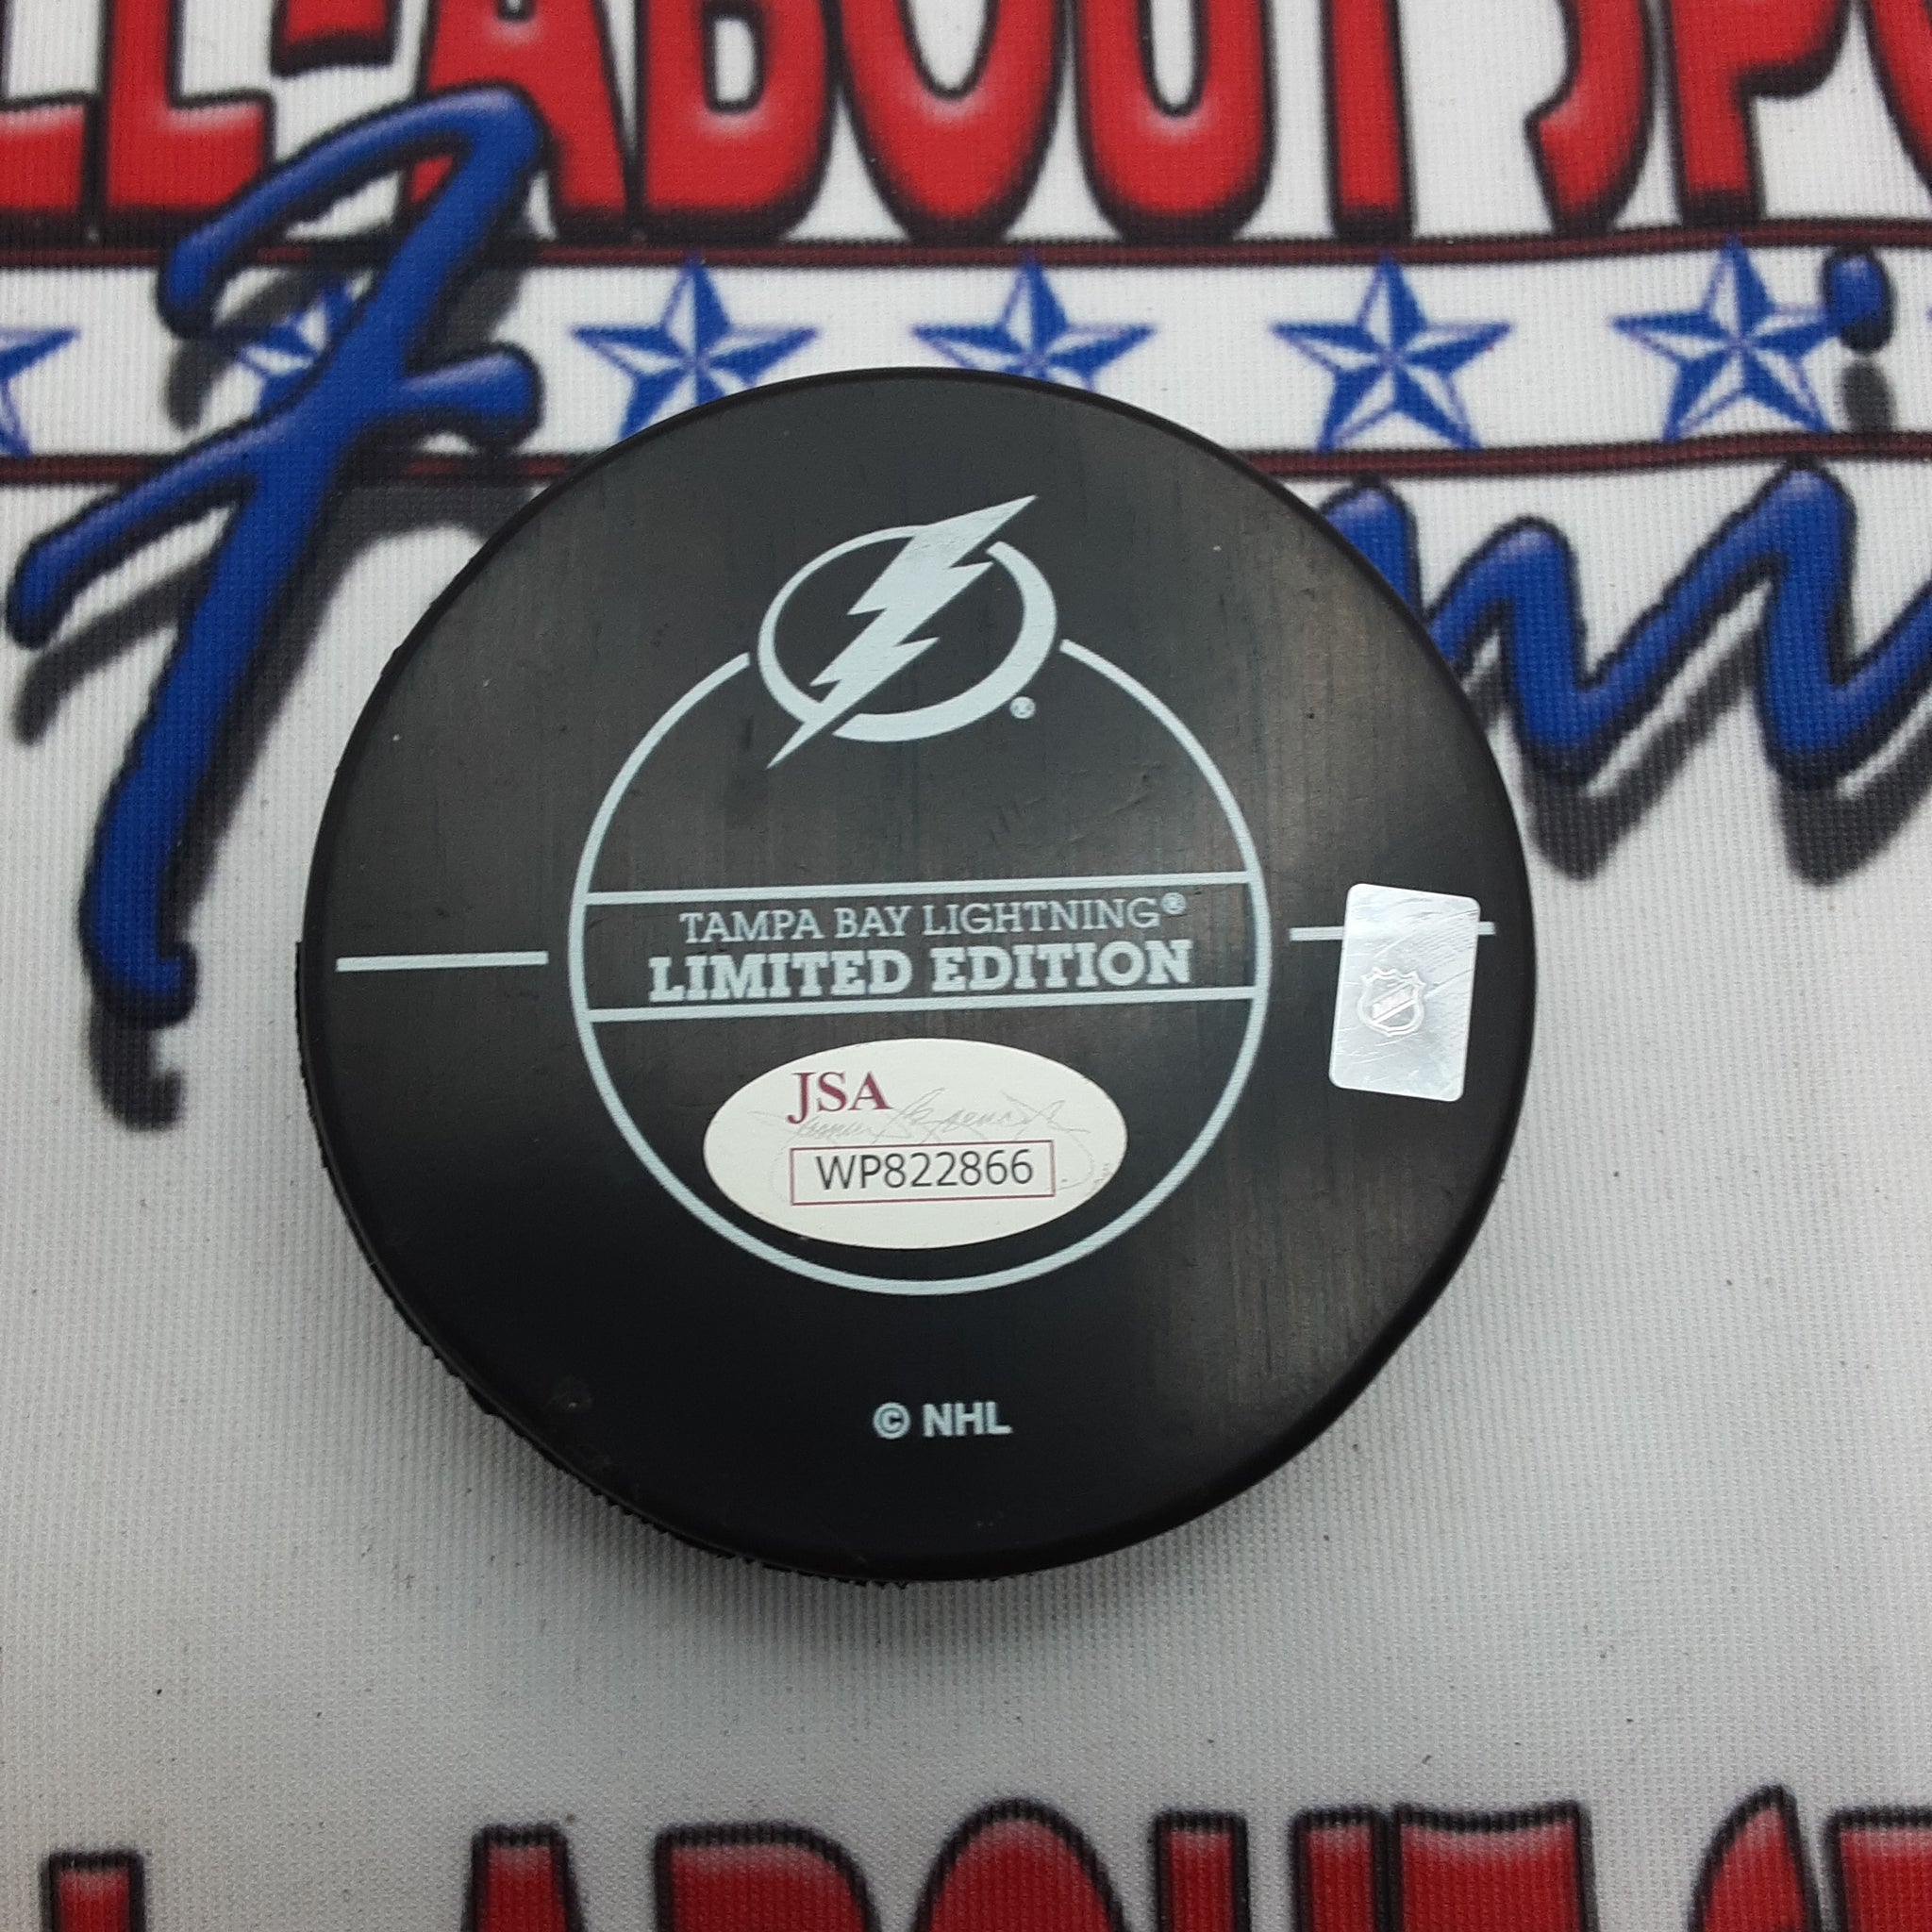 Nikita Kucherov All Star Game Authentic Signed Puck Autographed JSA